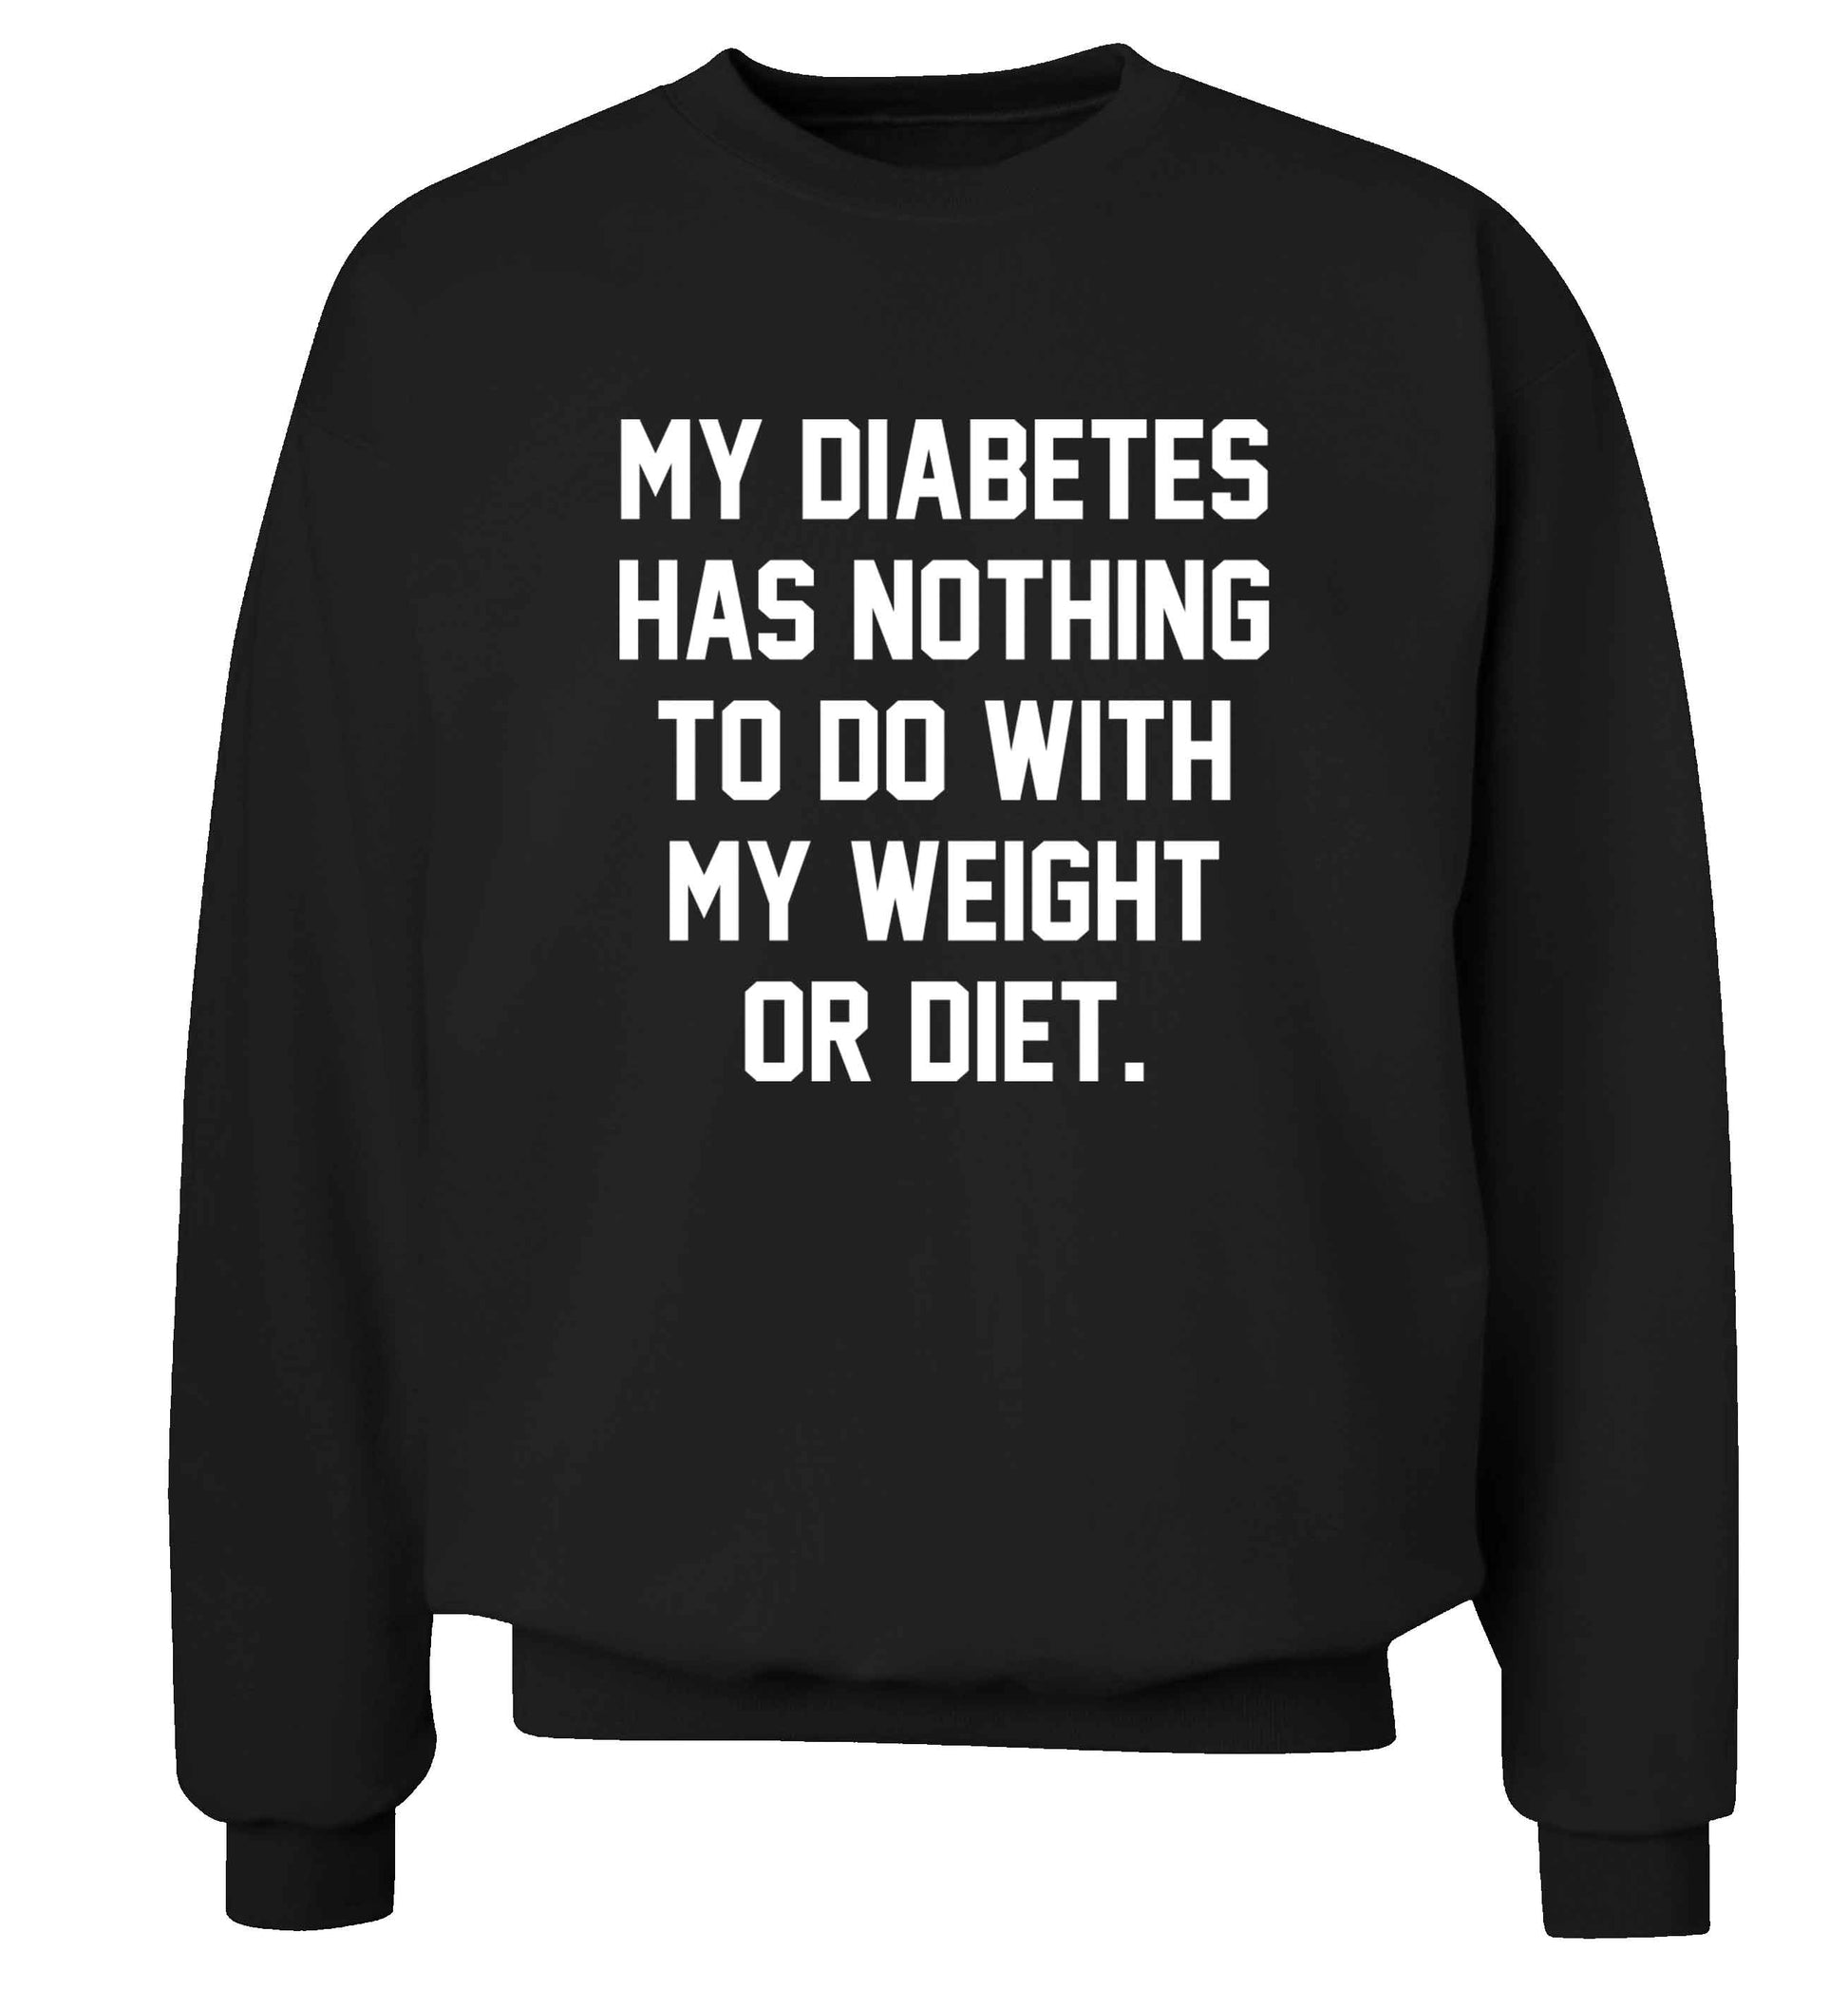 My diabetes has nothing to do with my weight or diet adult's unisex black sweater 2XL